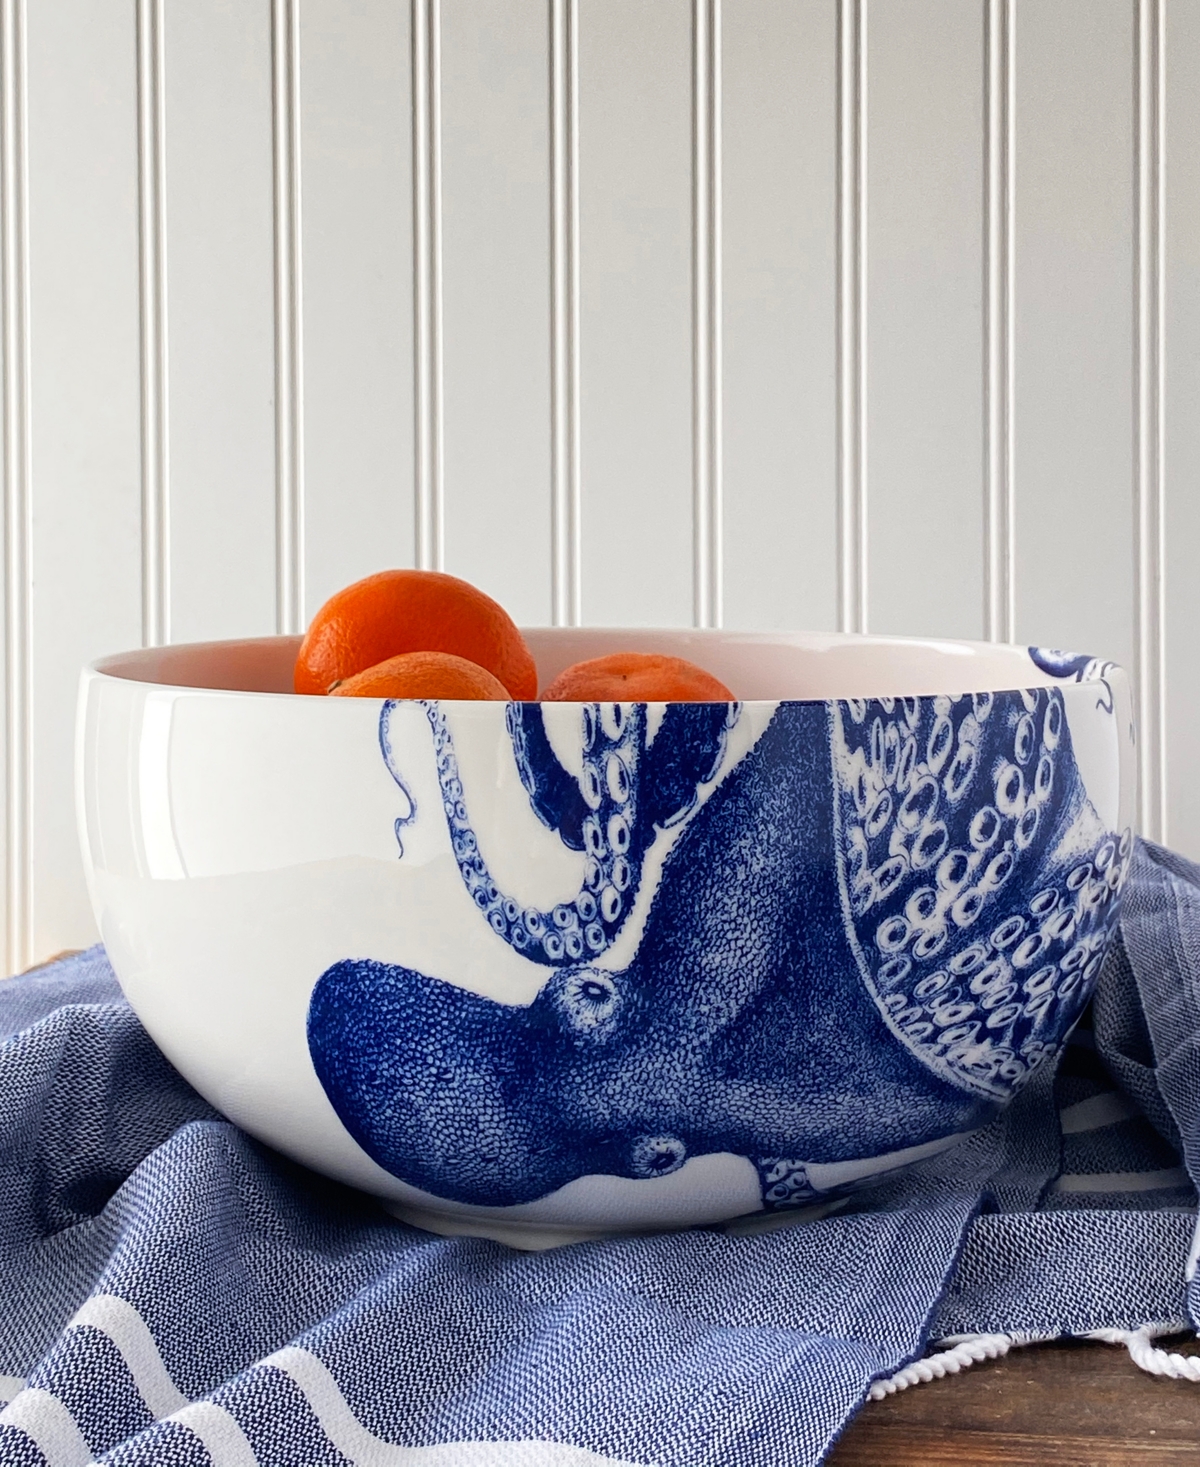 Shop Caskata Lucy Octopus Large Round Serving Bowl In Blue On White